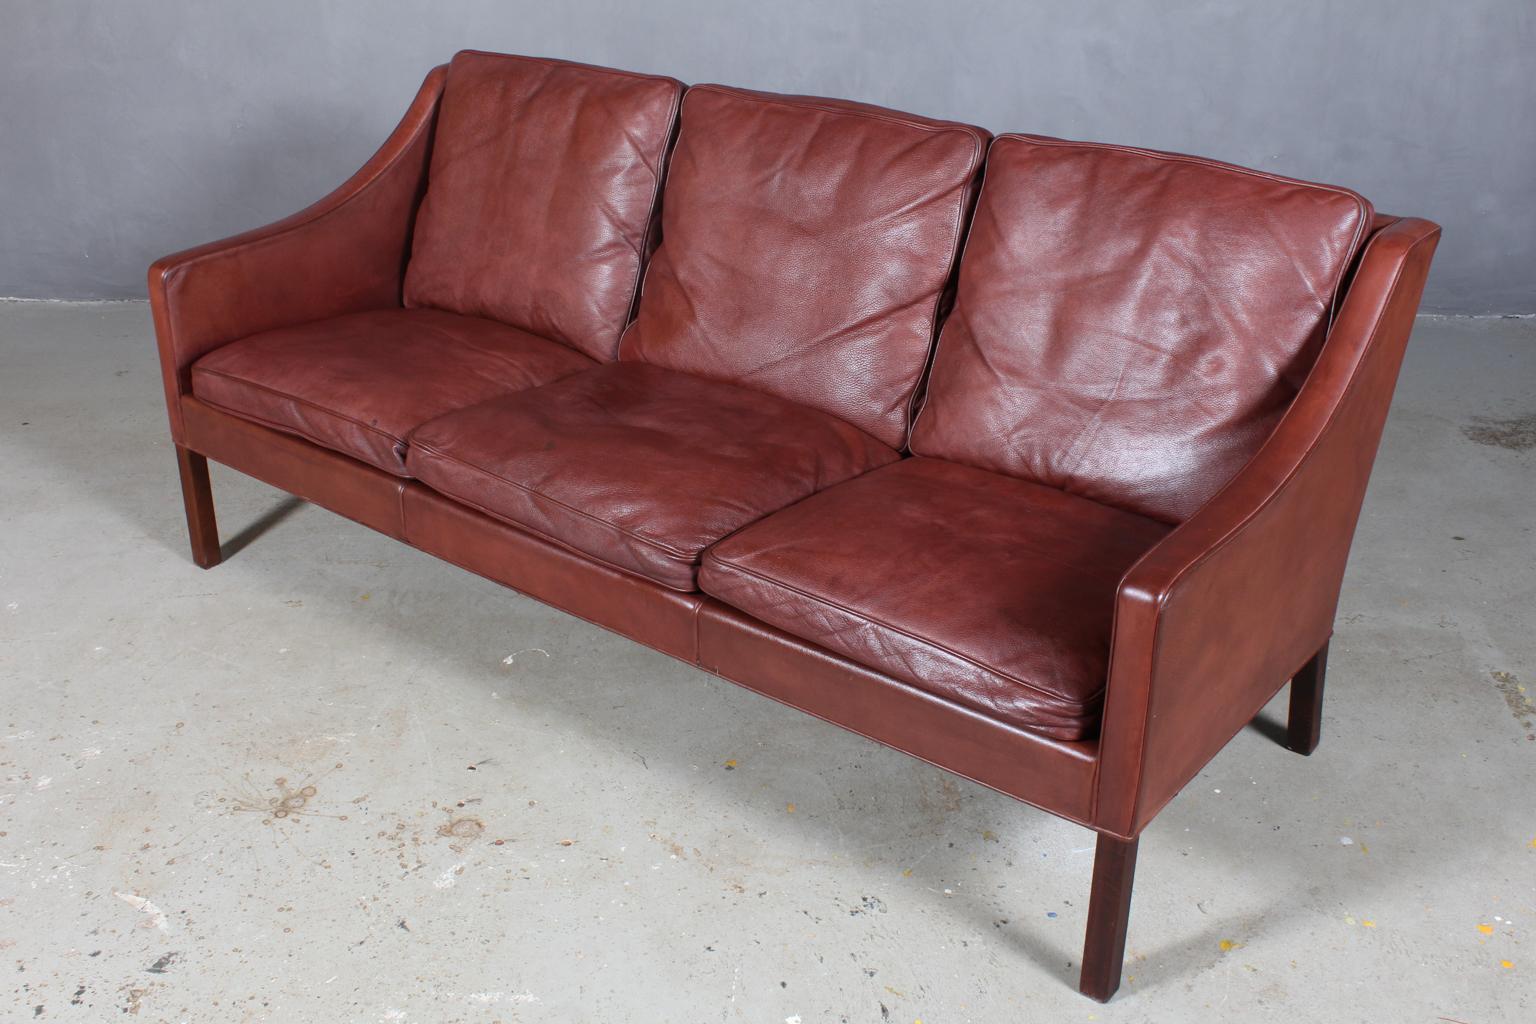 Børge Mogensen three-seat sofa original upholstered in patinated brown leather.

Legs of mahogany.

Model 2209, made by Fredericia Furniture.